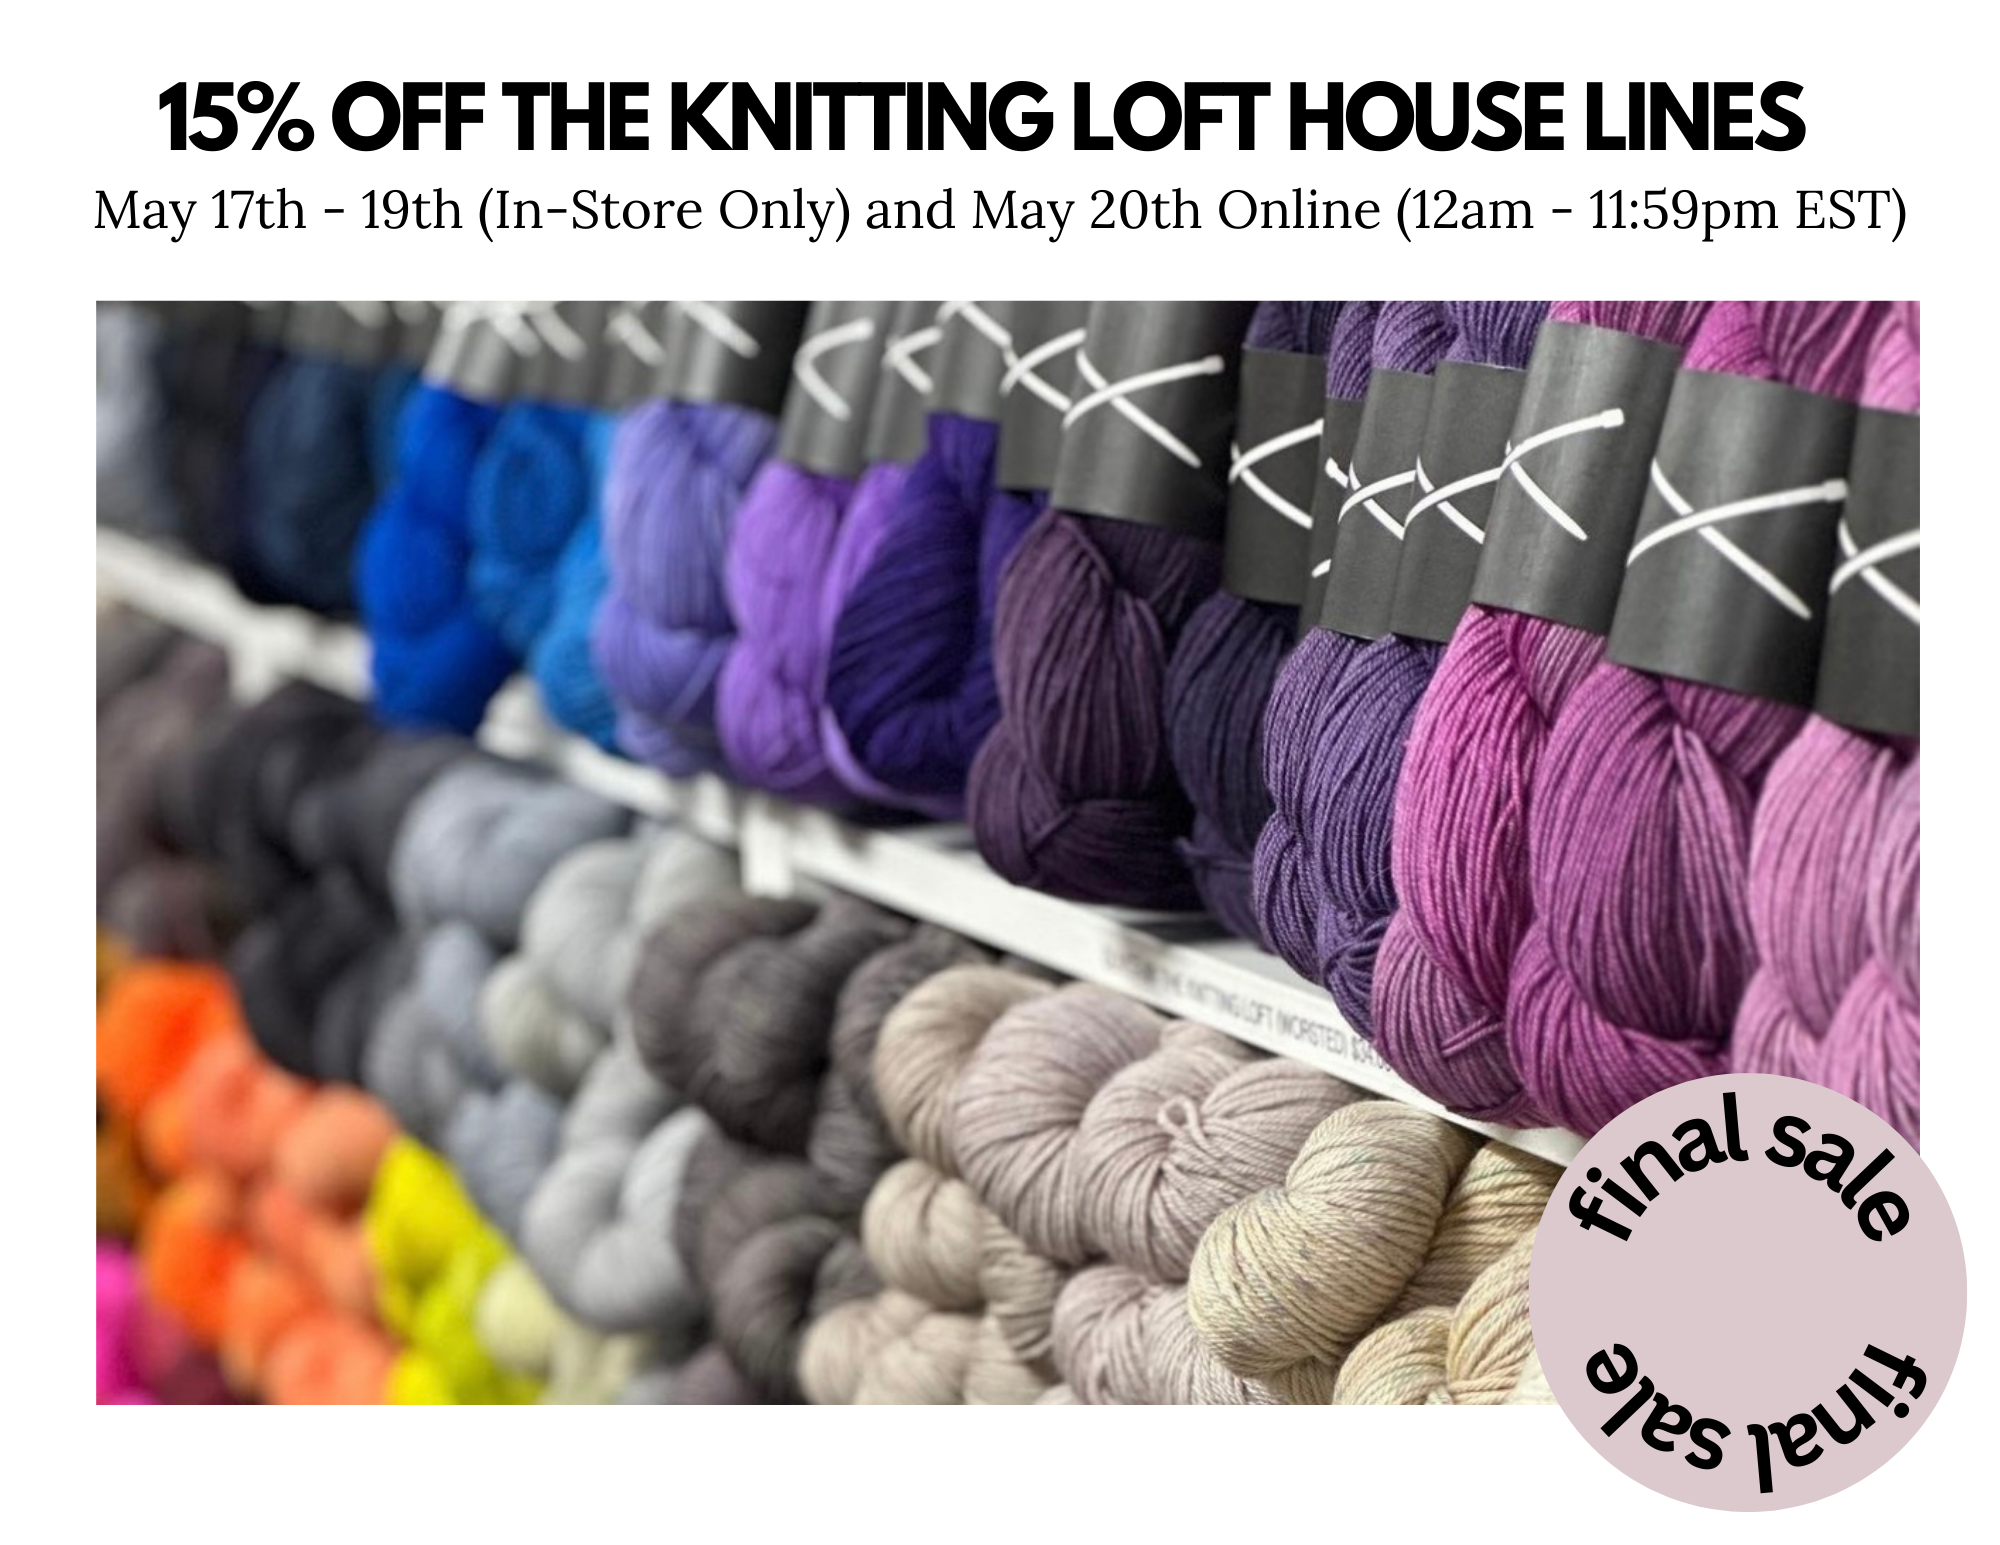 15% OFF THE KNITTING LOFT HOUSE LINES. May 17th - 19th (In-Store Only) and May 20th Online (12am - 11:59pm EST). Final sale